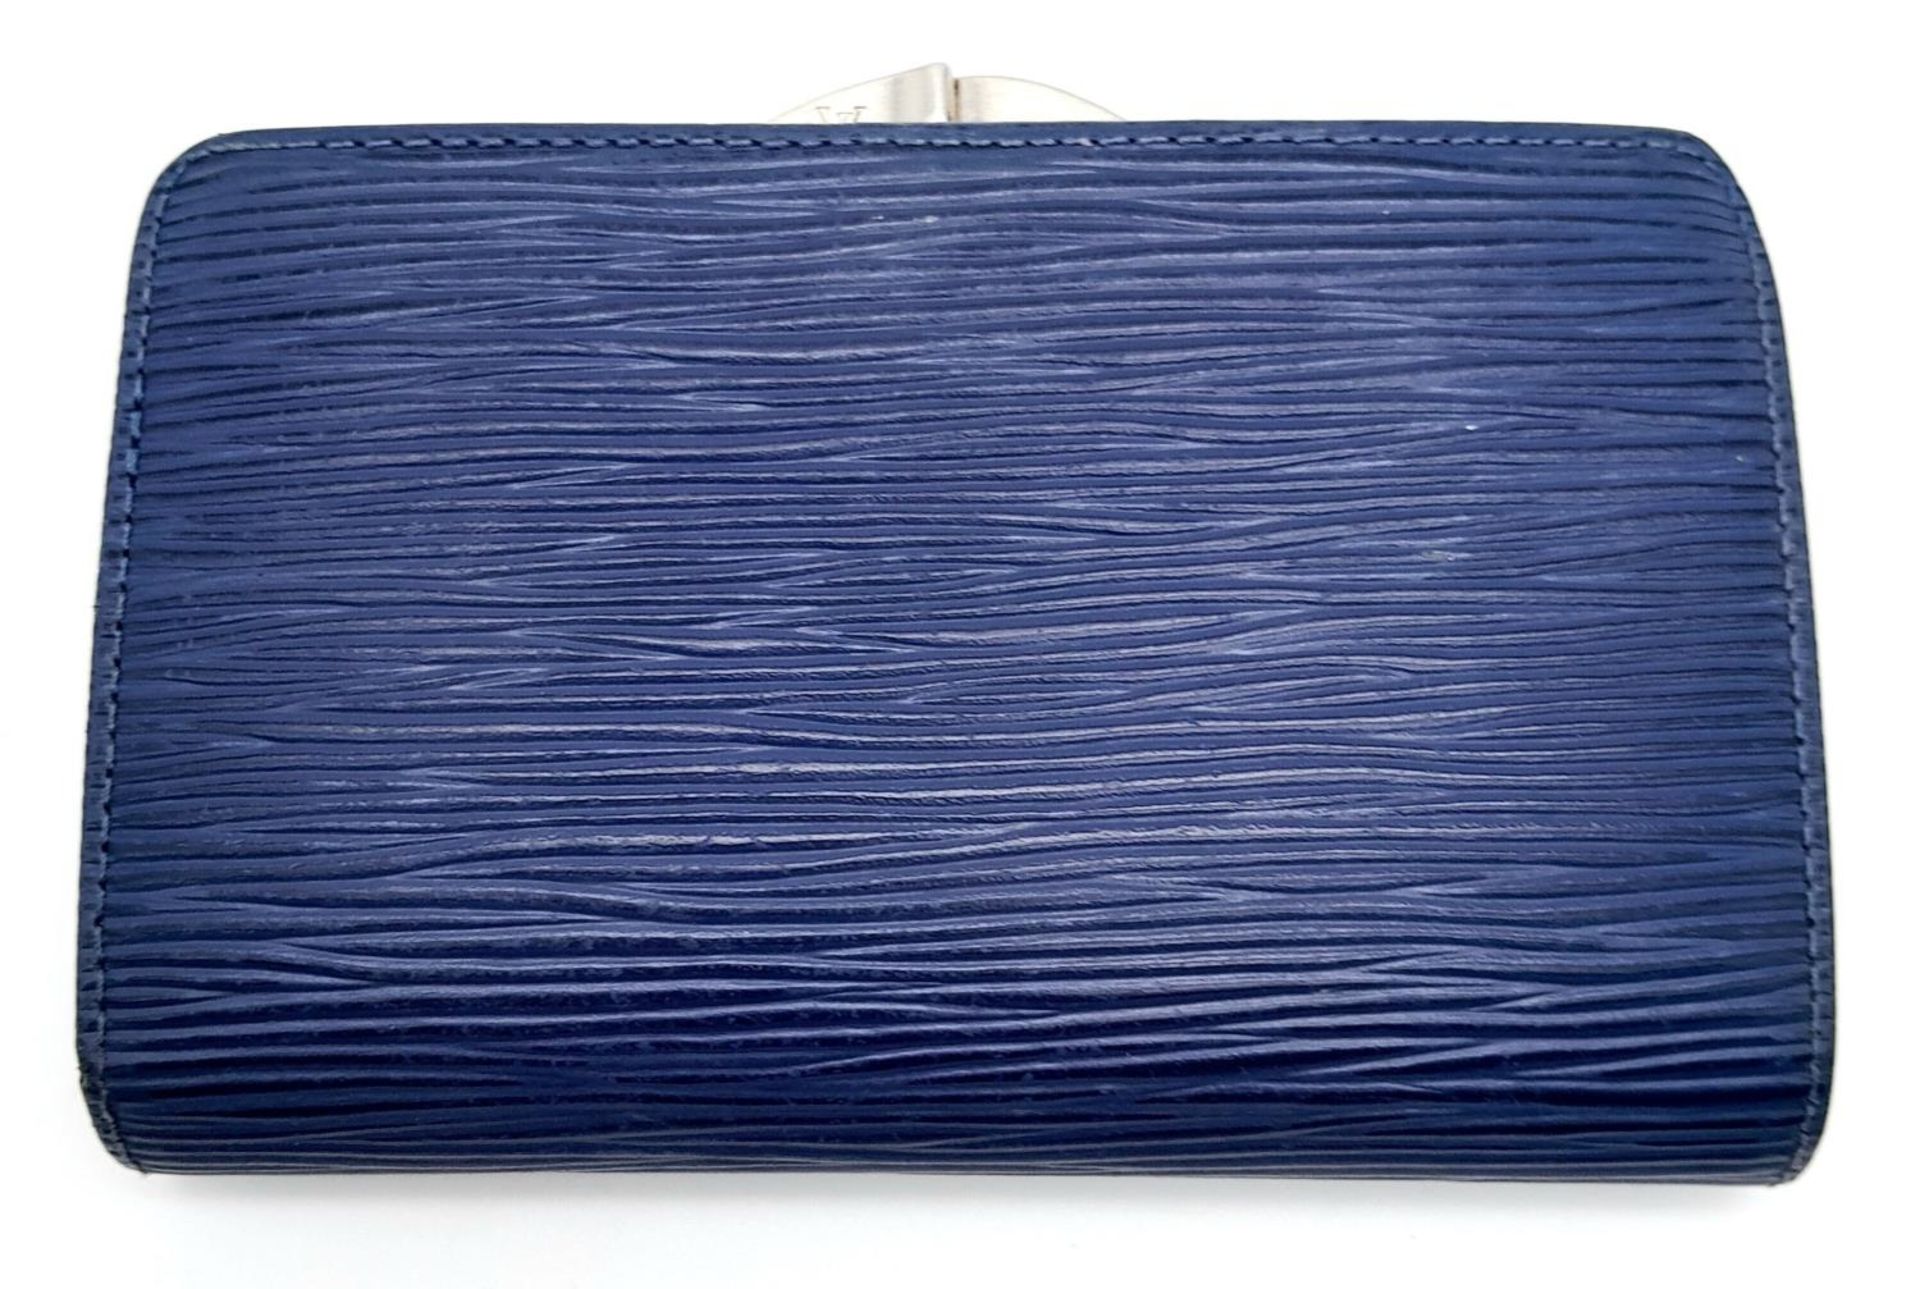 A Vintage Louis Vuitton Blue Bifold Wallet. Epi leather exterior with silver-toned hardware and - Image 4 of 17